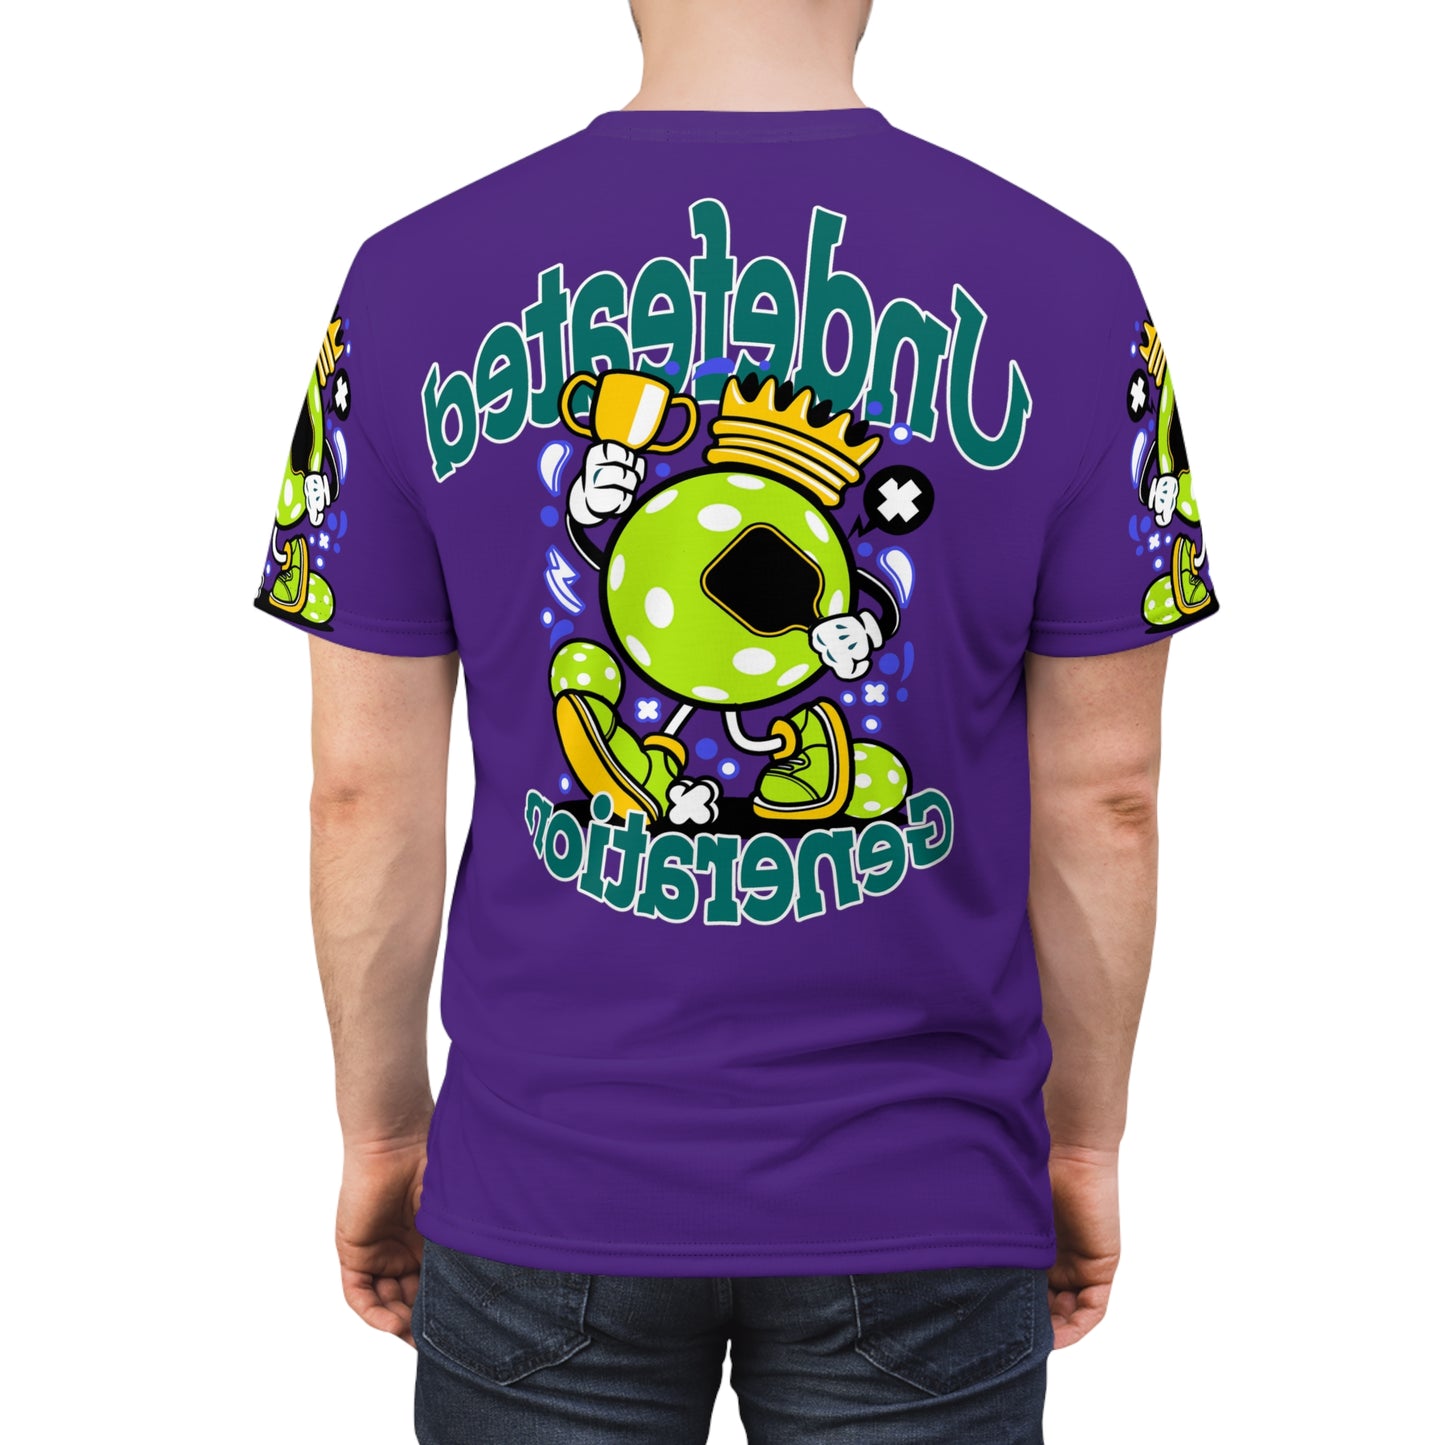 Pickleball Undefeated Champion - T-Shirts For You